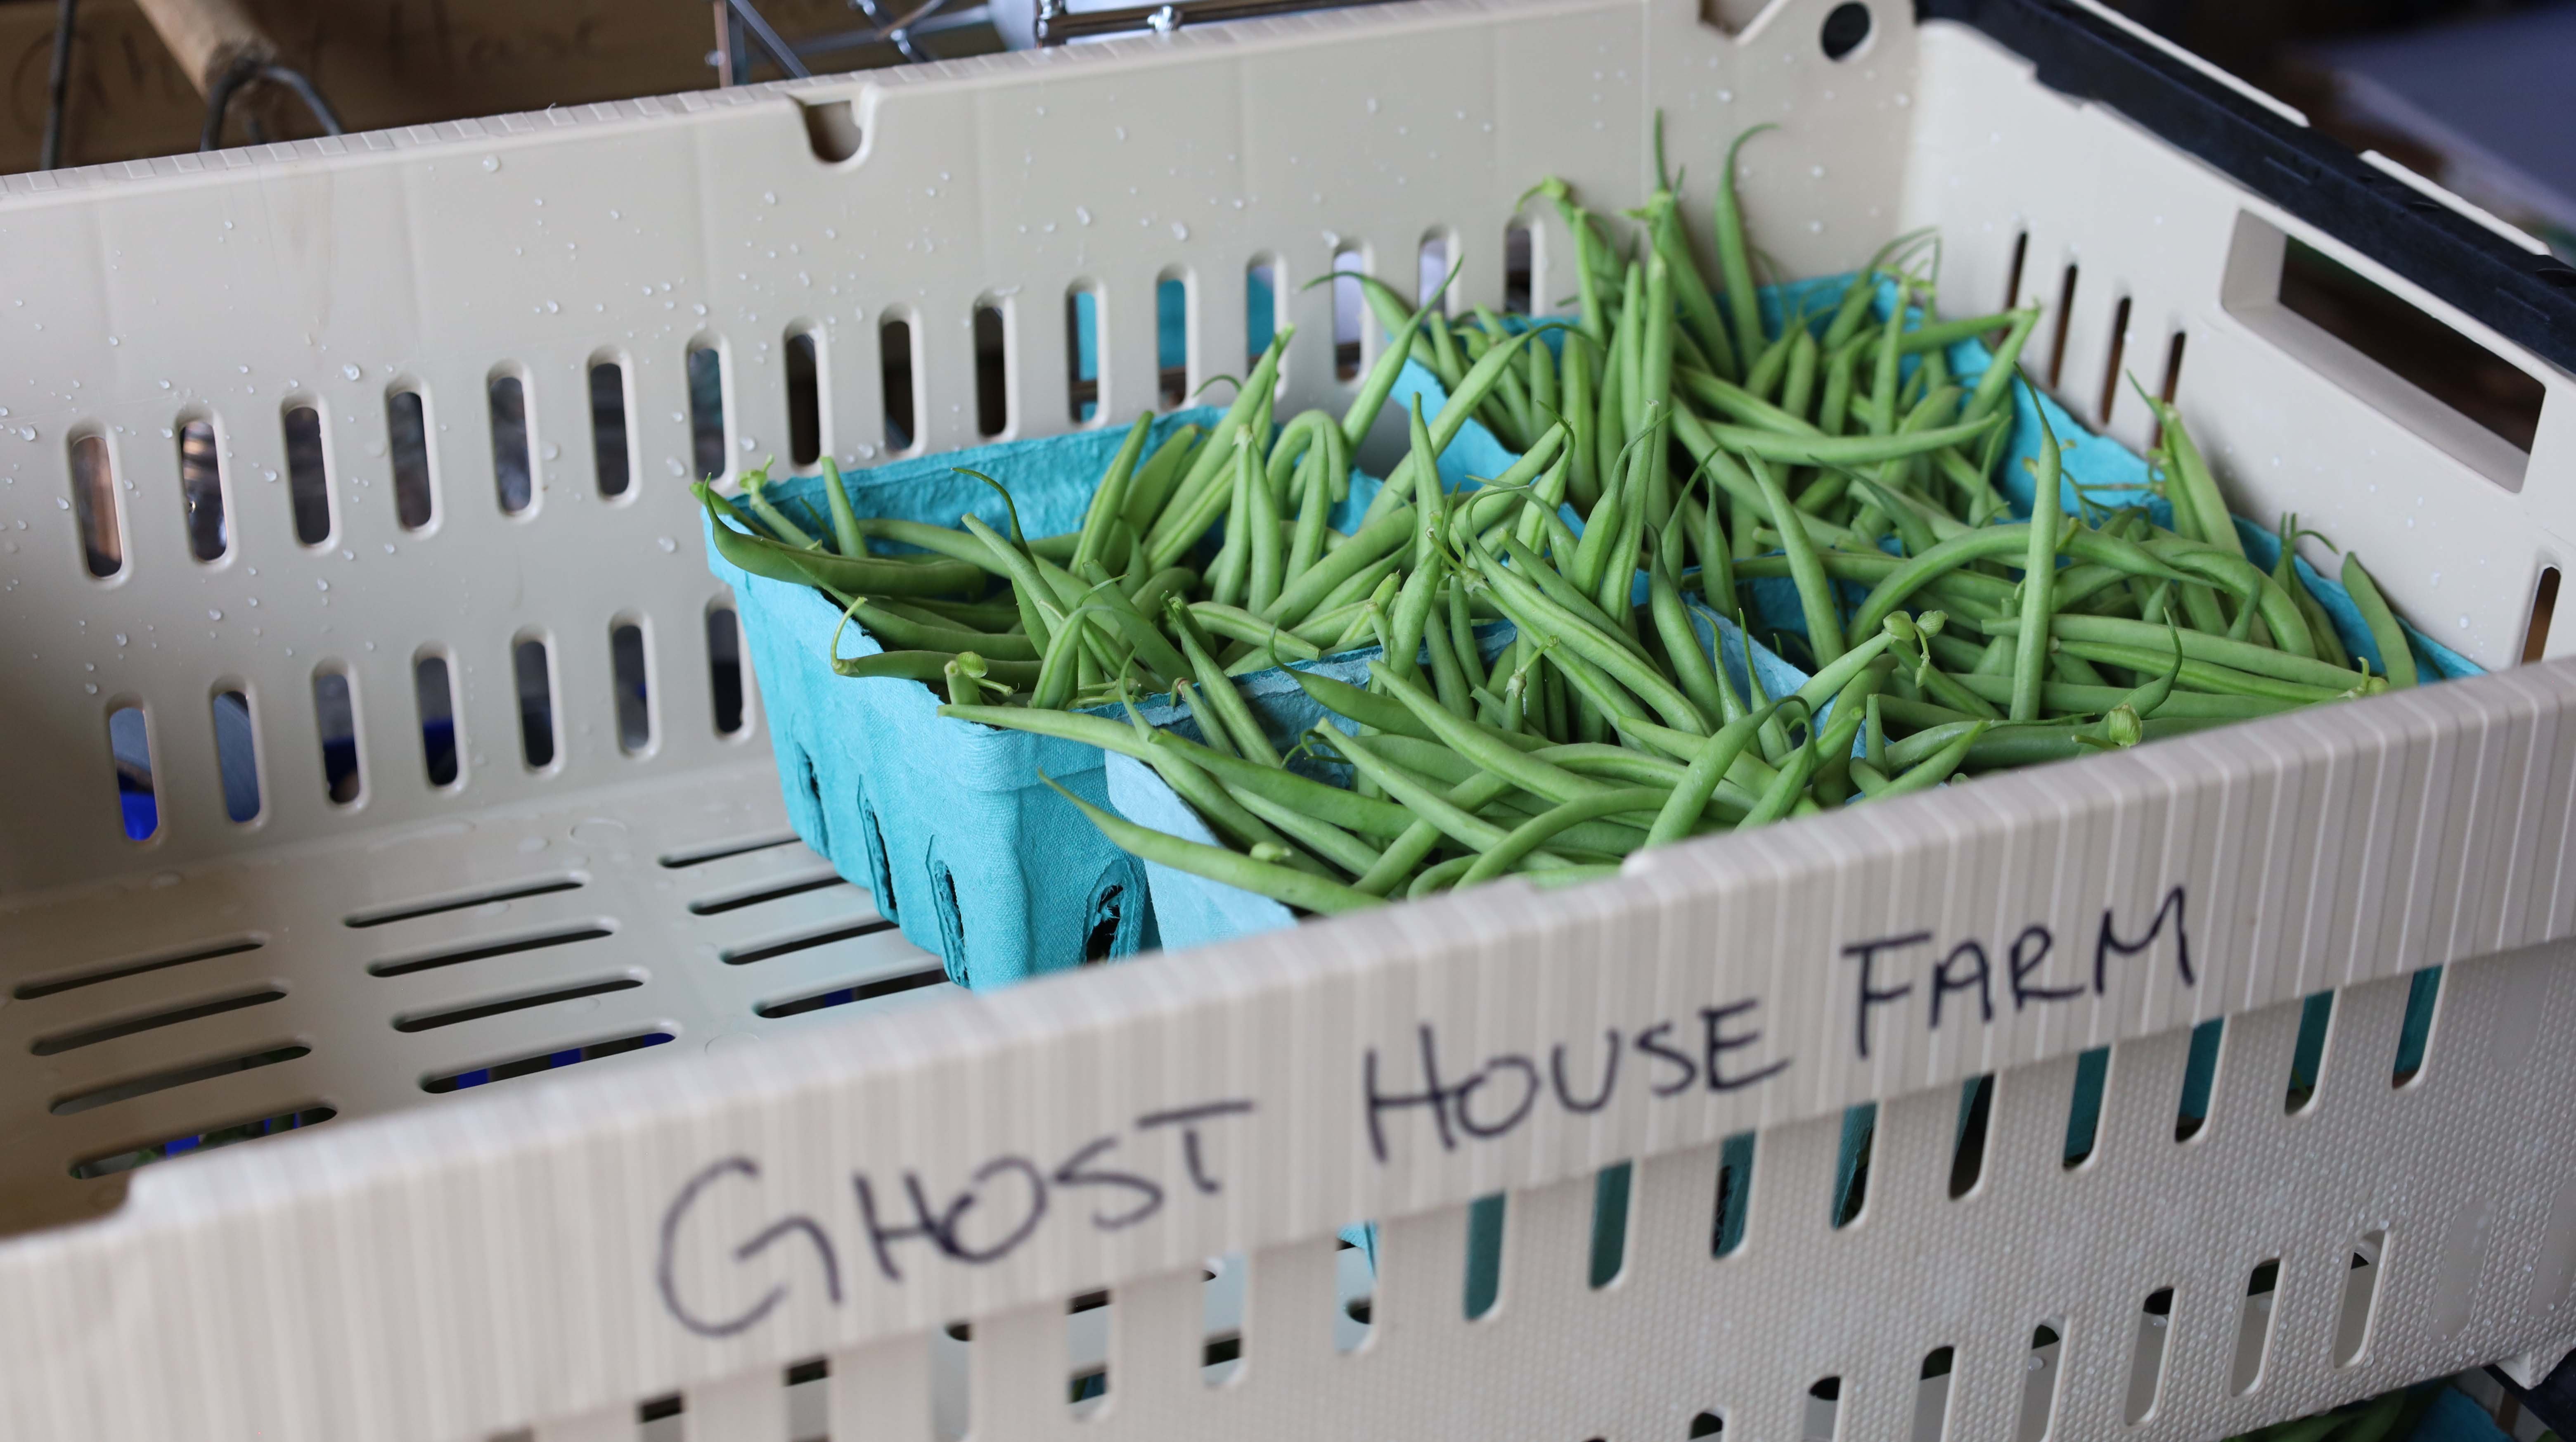 Green Beans from Ghost House Farms